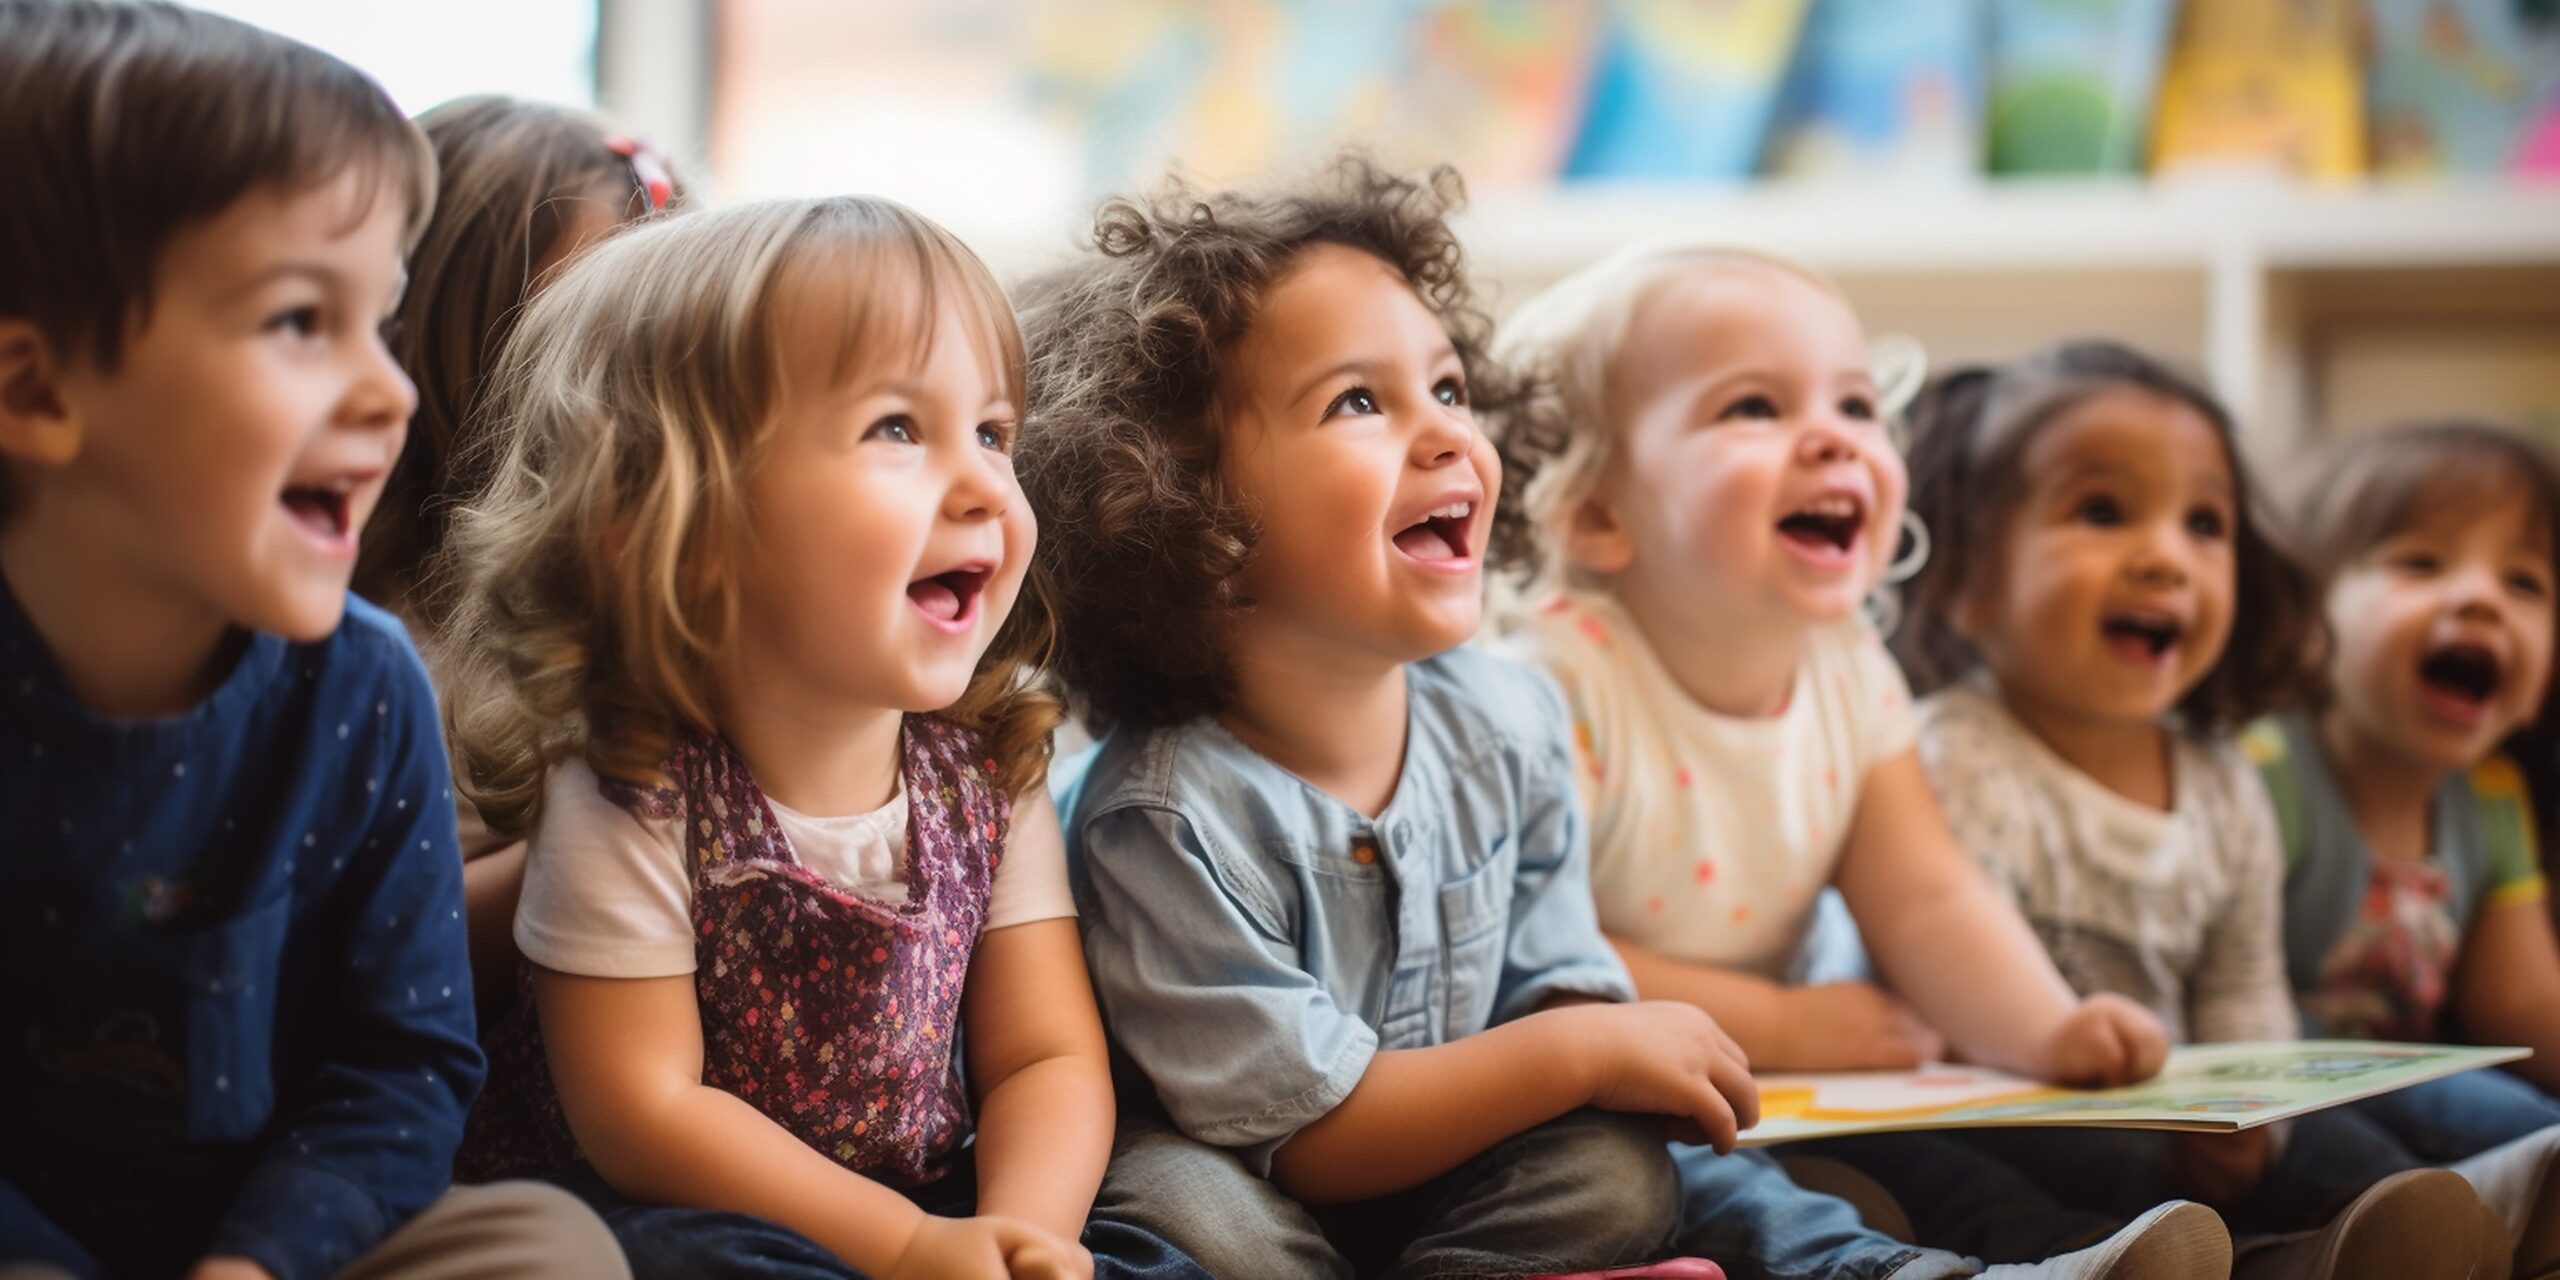 National Minimum Standards for Regulated Childcare